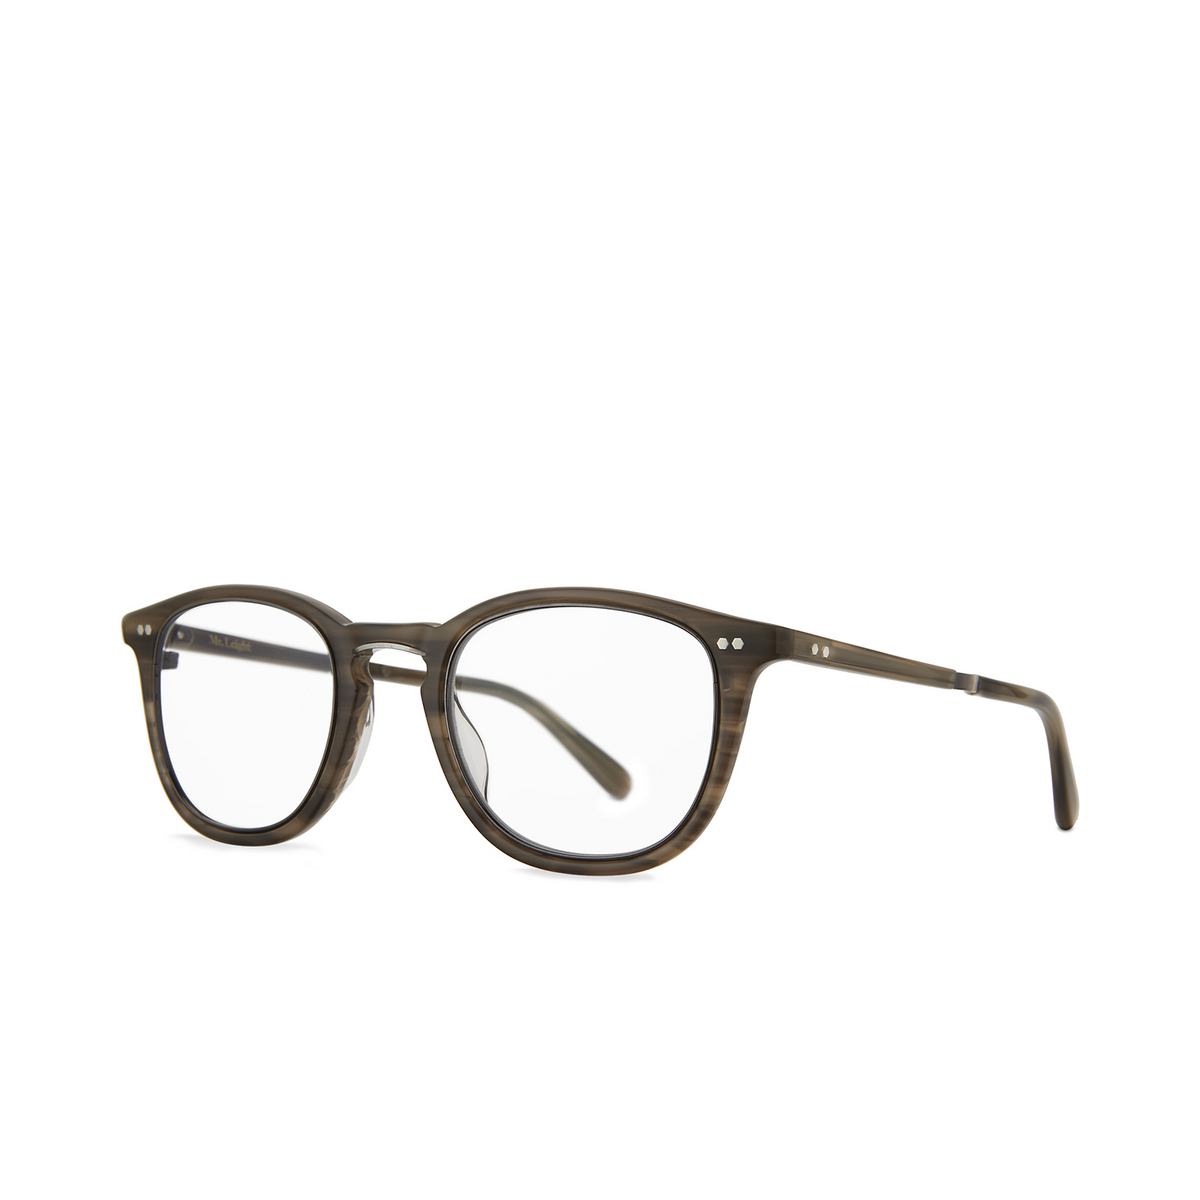 Mr. Leight COOPERS C Eyeglasses GW-PW Greywood - Pewter - three-quarters view